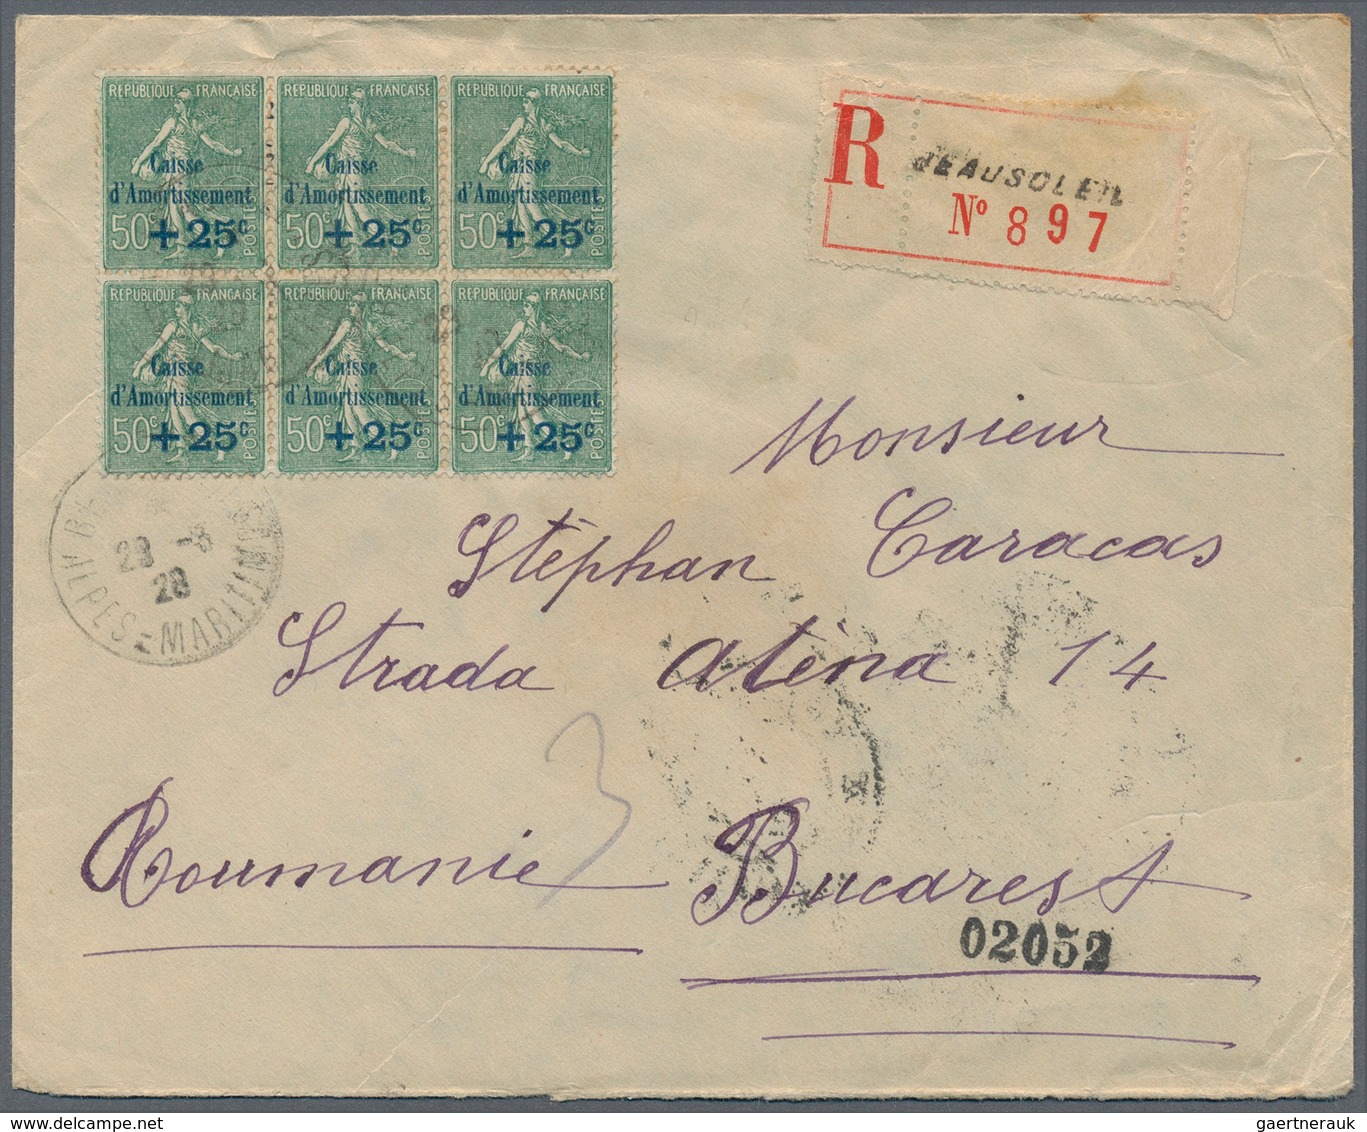 Frankreich: 1900/1960, Absolutely Awesome Collection Of Blocks Of Four On Entires Bearing 450 Envelo - Verzamelingen